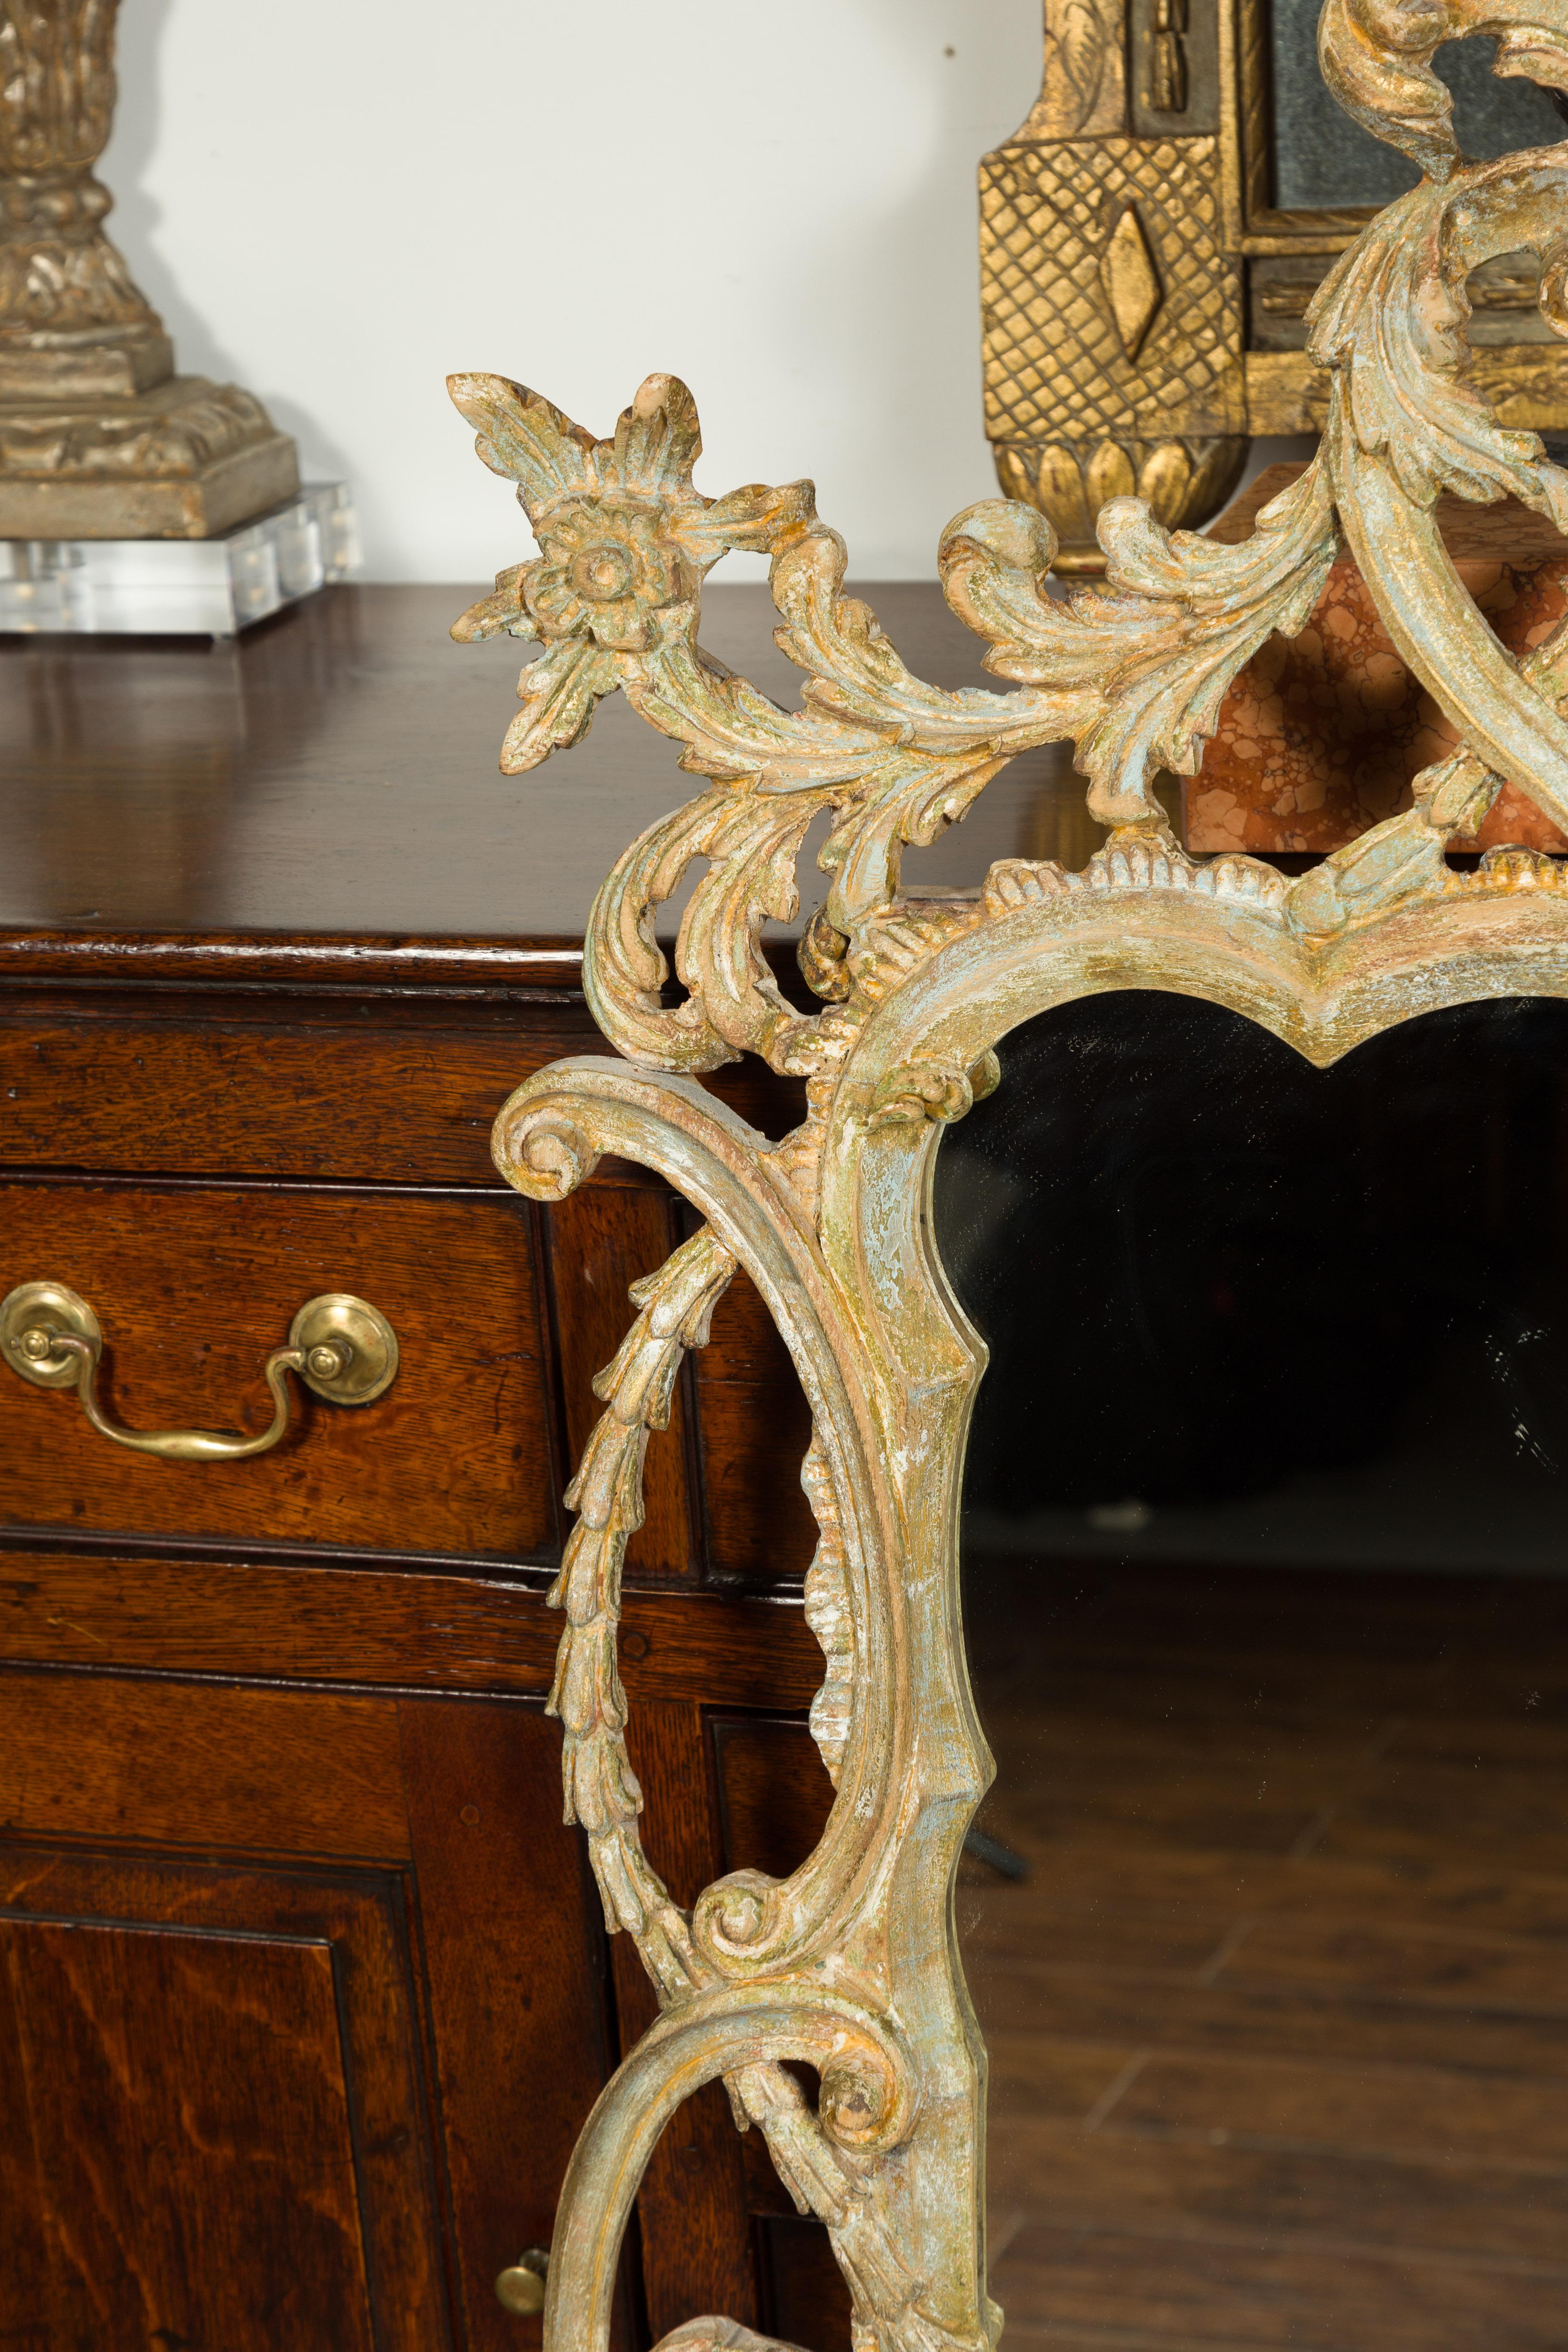 19th Century Italian 1800s Carved and Painted Crested Mirror with C-Scrolls and Foliage